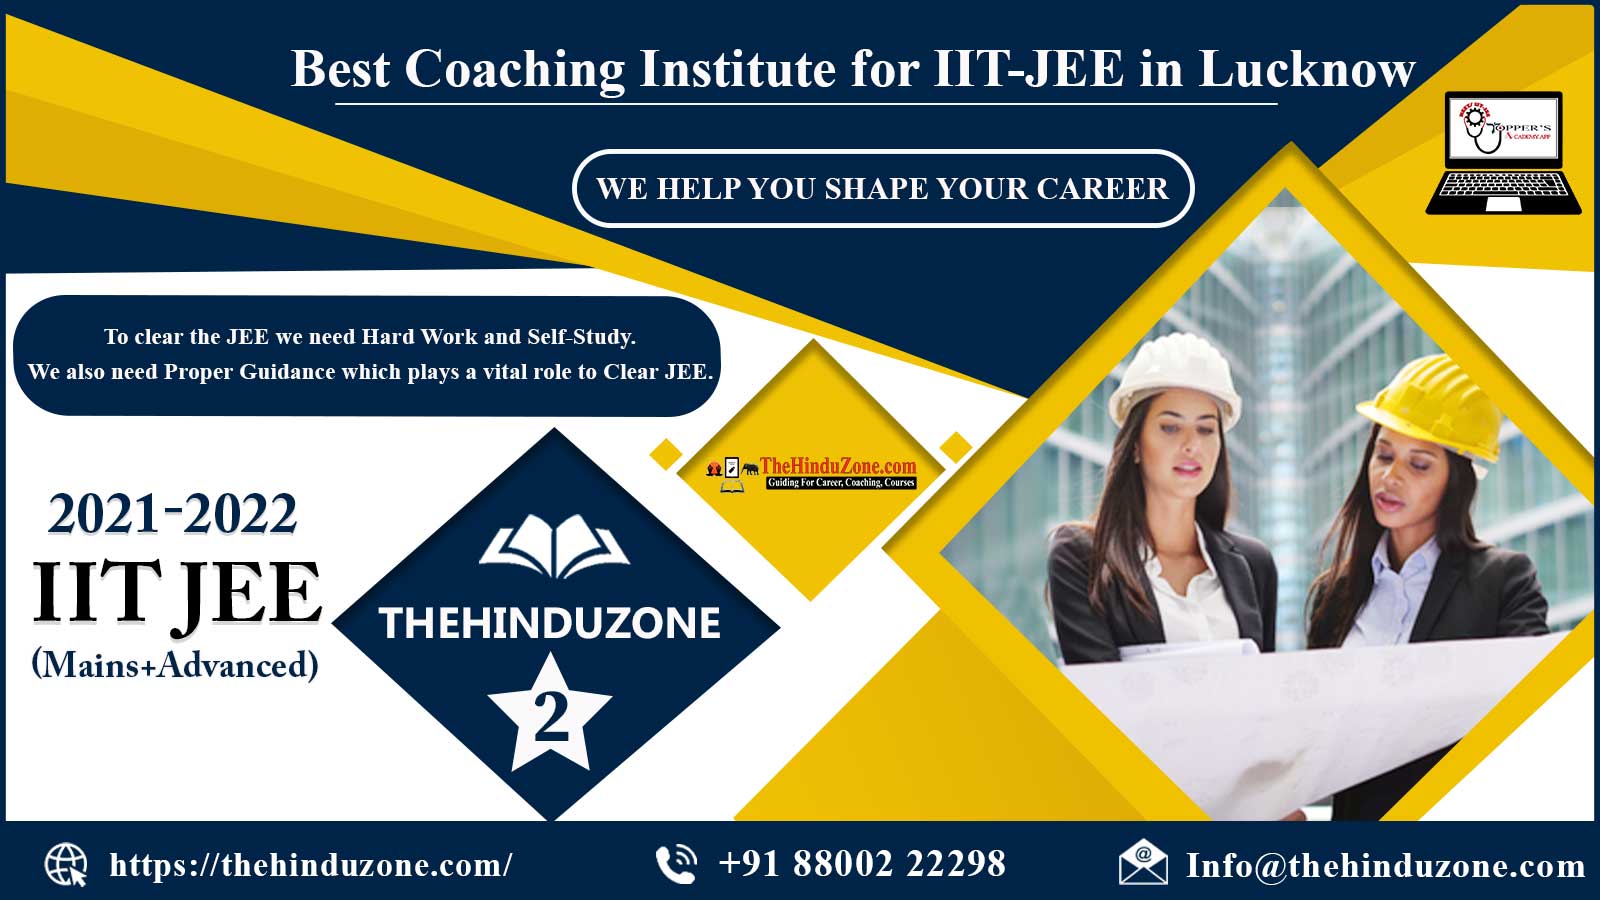 The Hinduzone IIT JEE Coaching in Lucknow